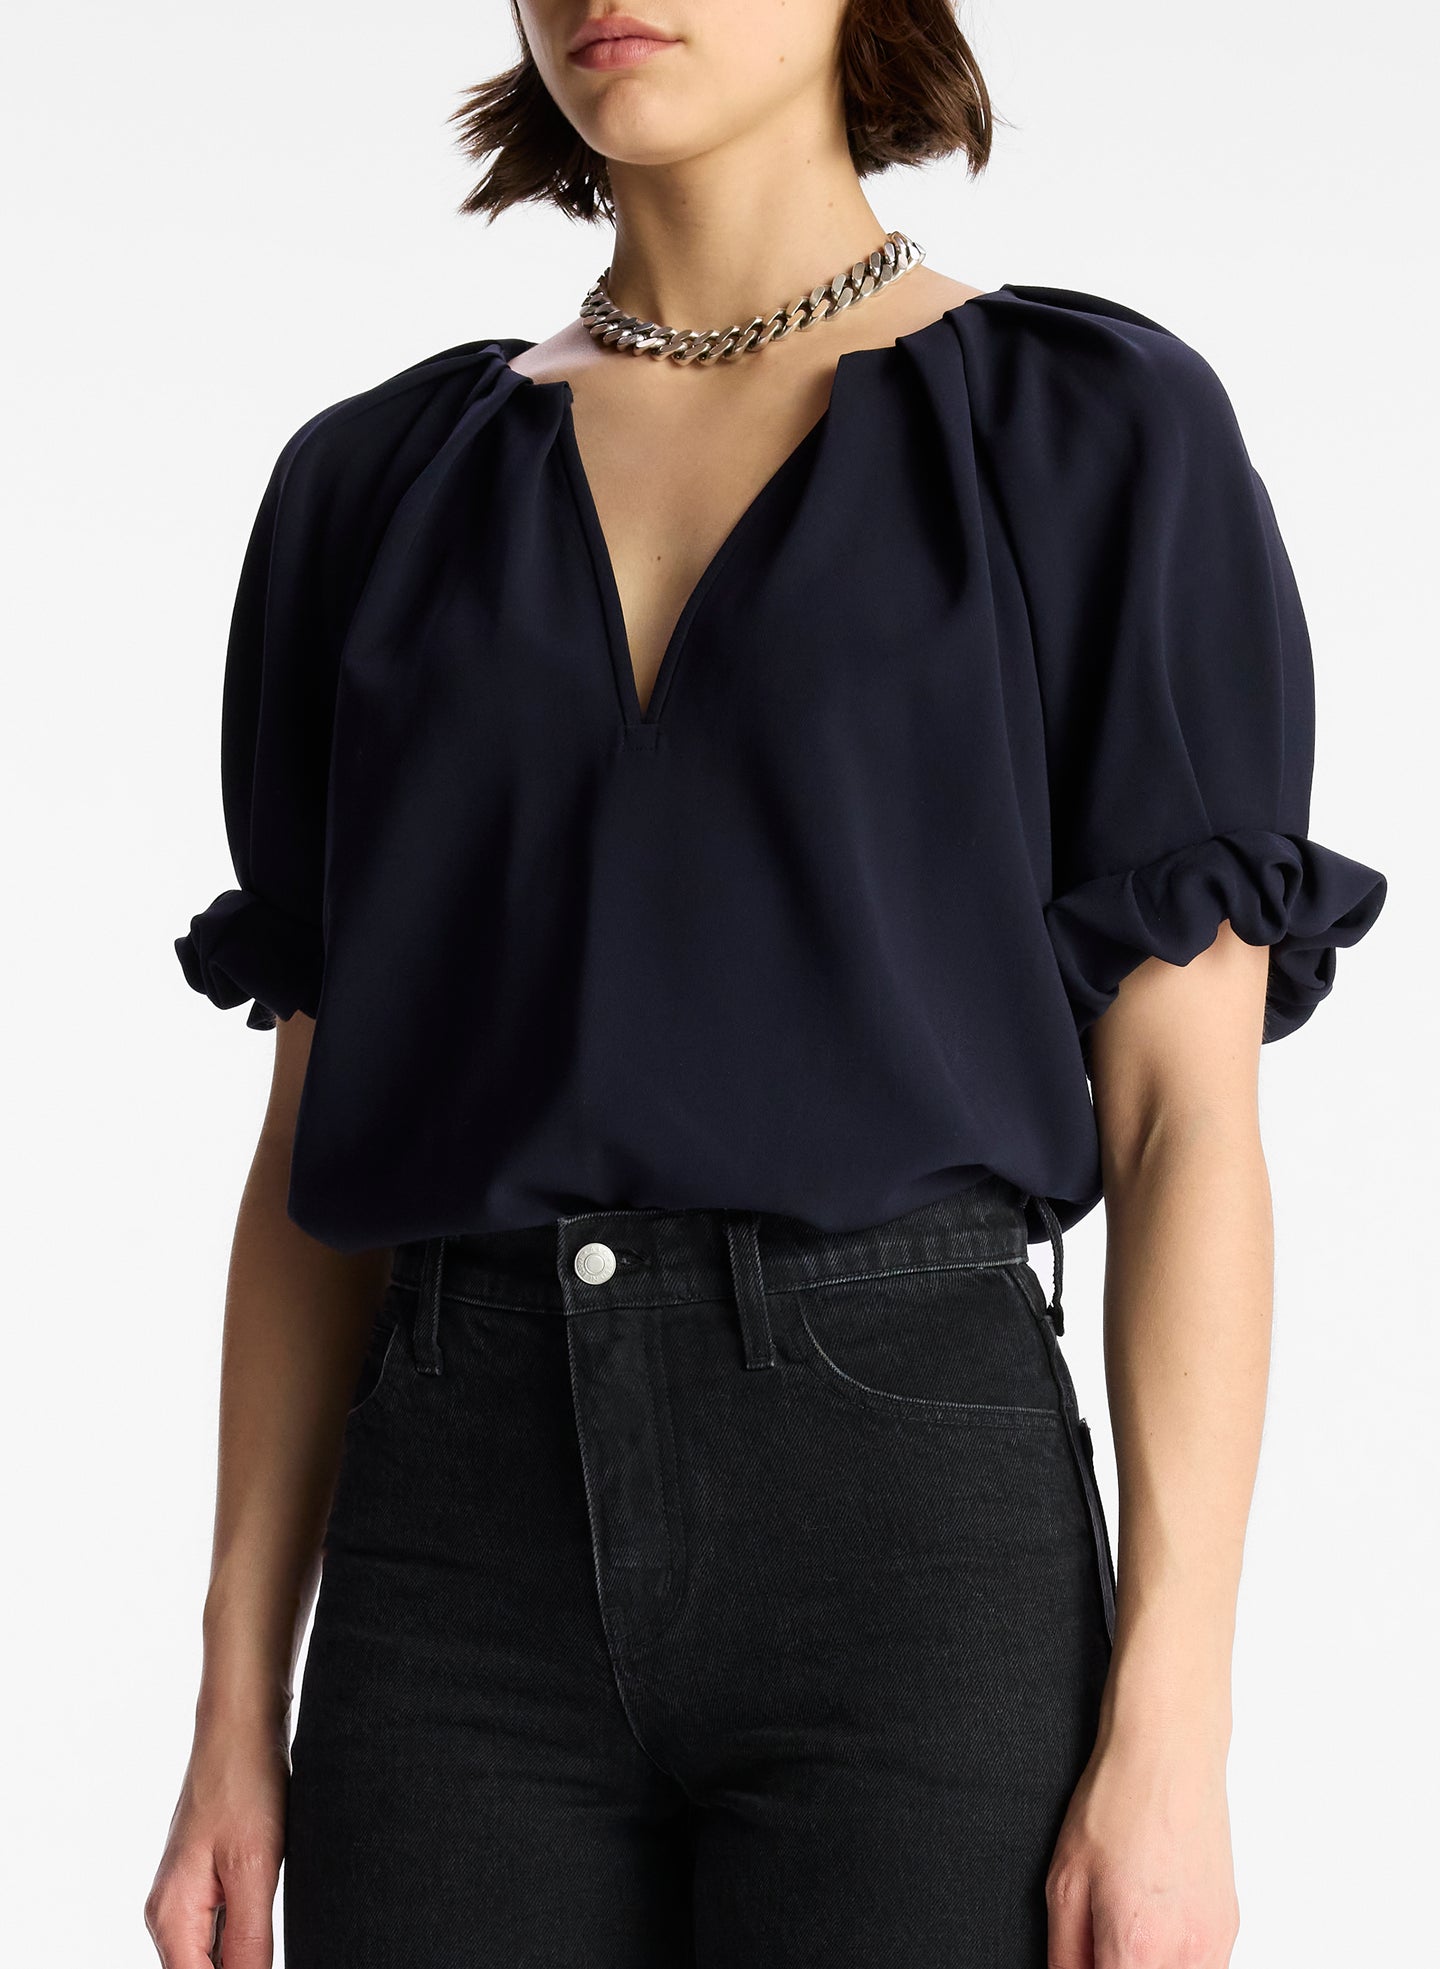 front view of woman wearing navy blue short sleeve vneck top and dark wash denim